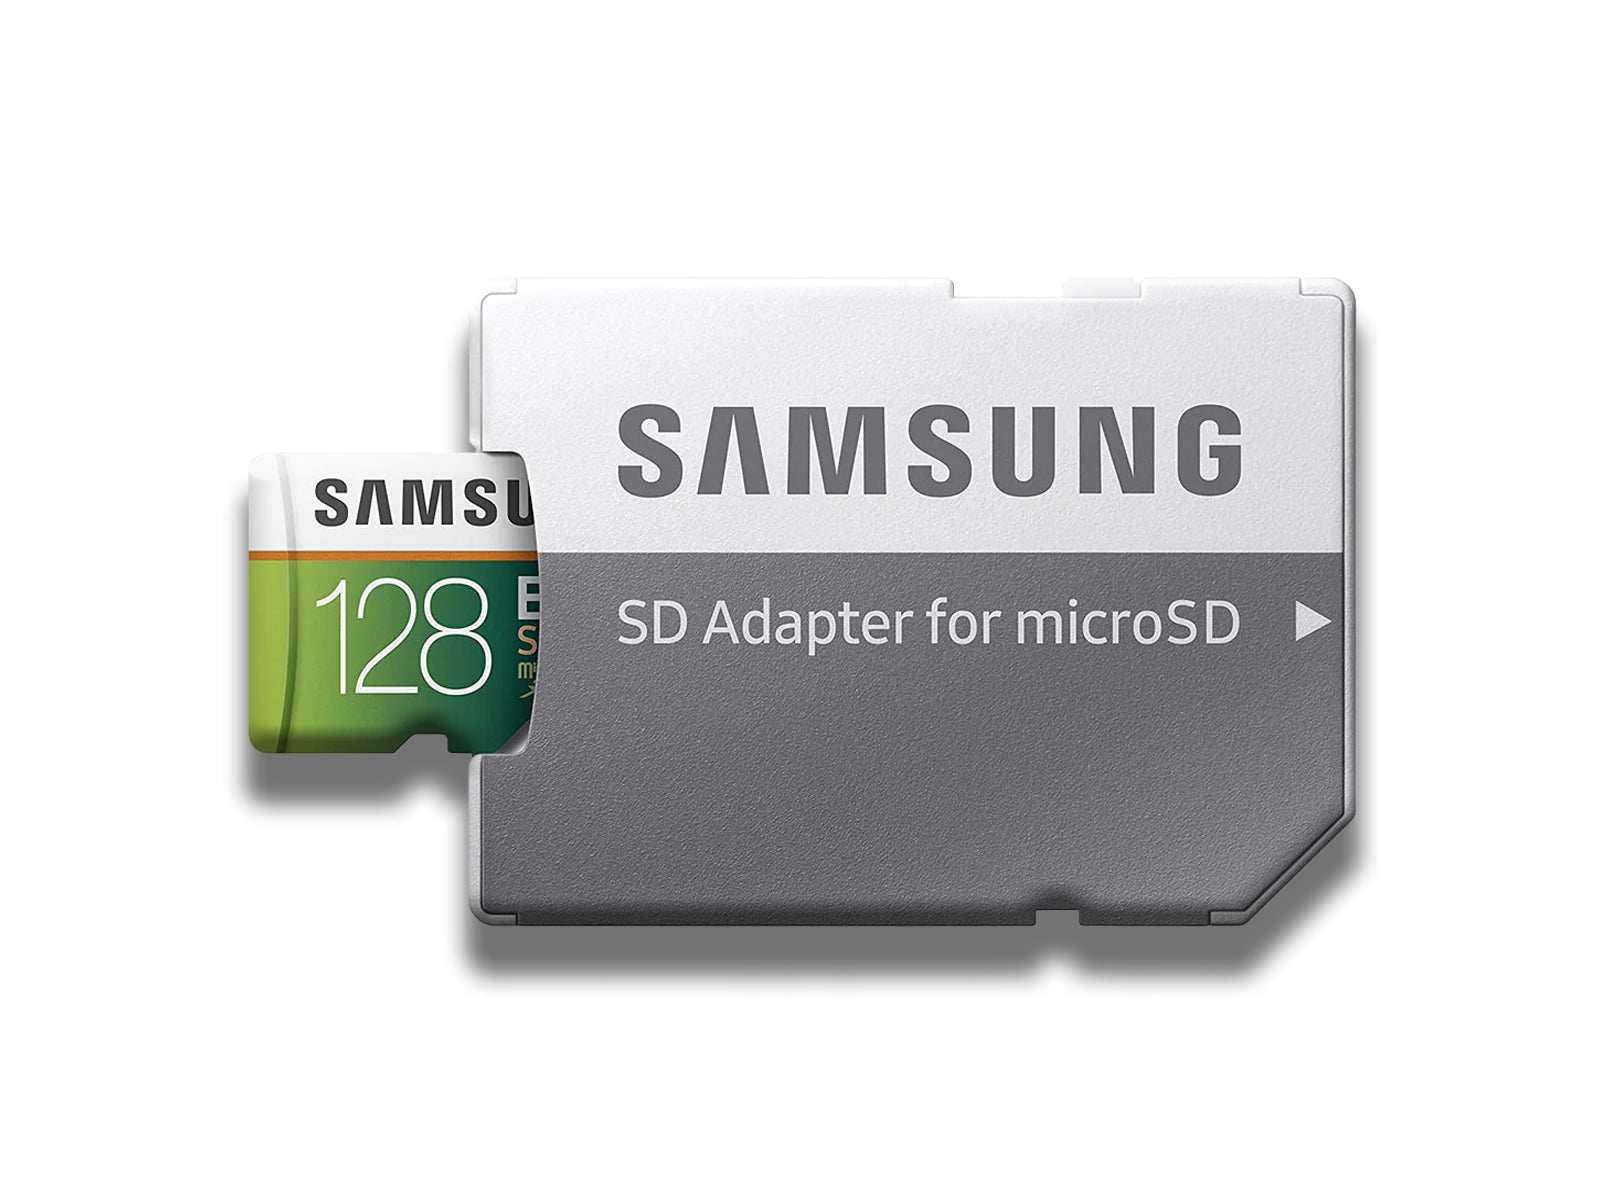 MicroSD 128GB Card Inserted Into SD Adapter